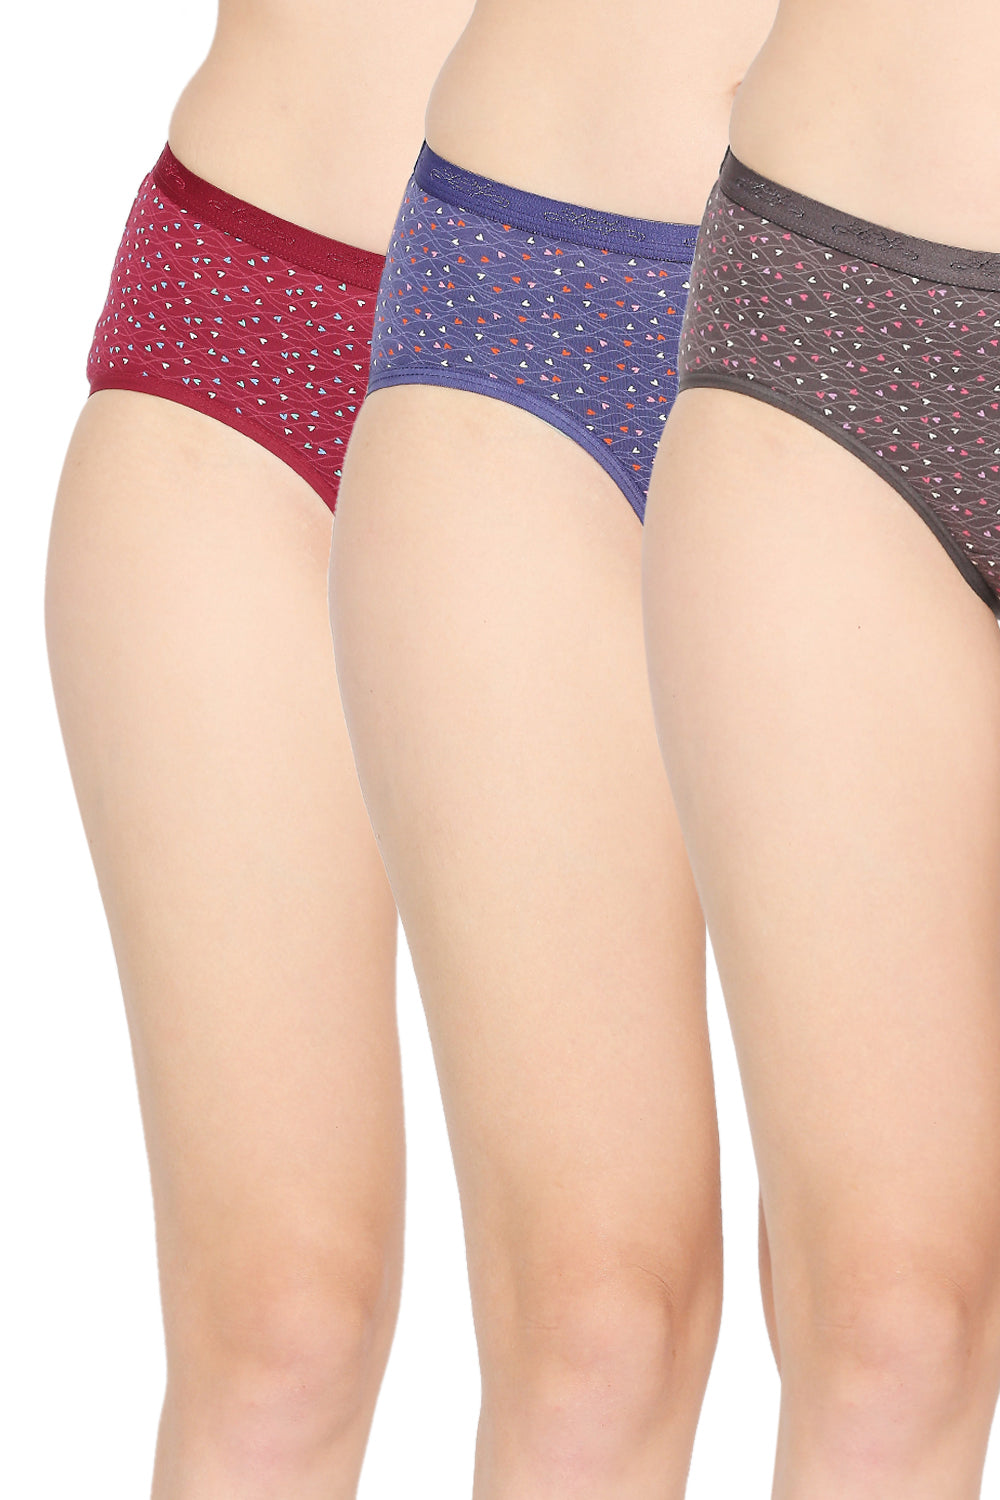 Red Rose Printed Cotton Medium Rise  Full Coverage Hipster Panties - Multicolor Pack of 3